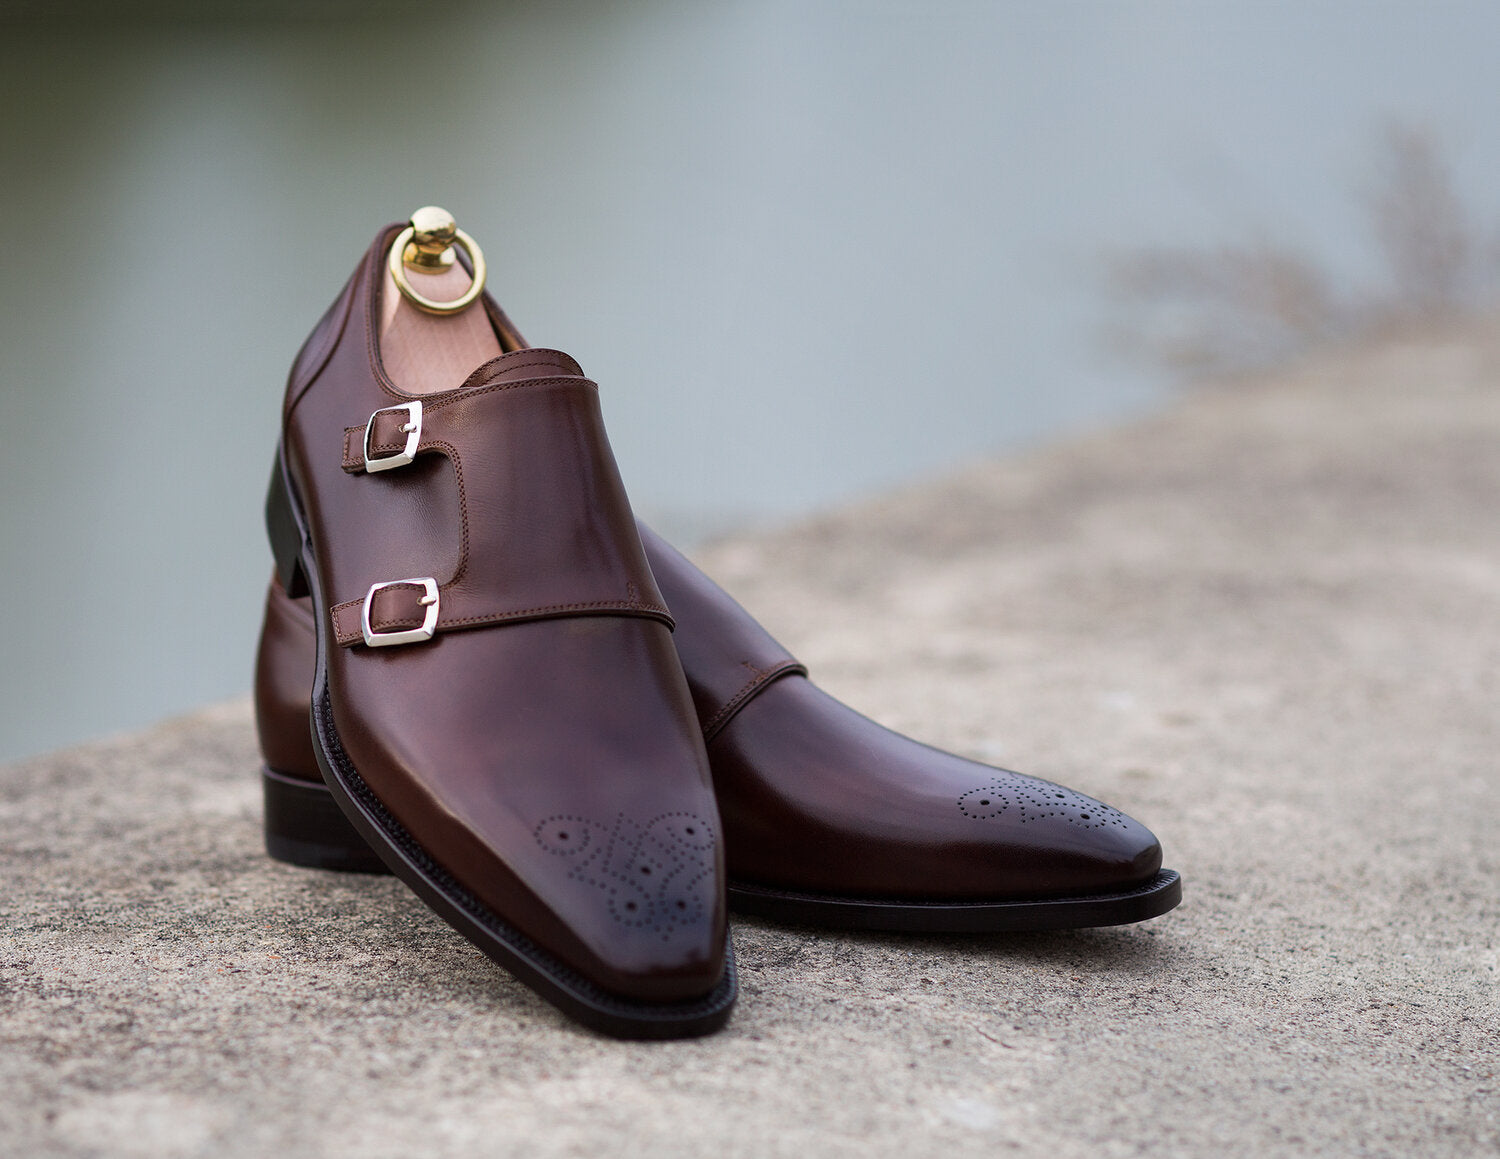 Stefano Bemer brown double monk-strap shoes with Medallion